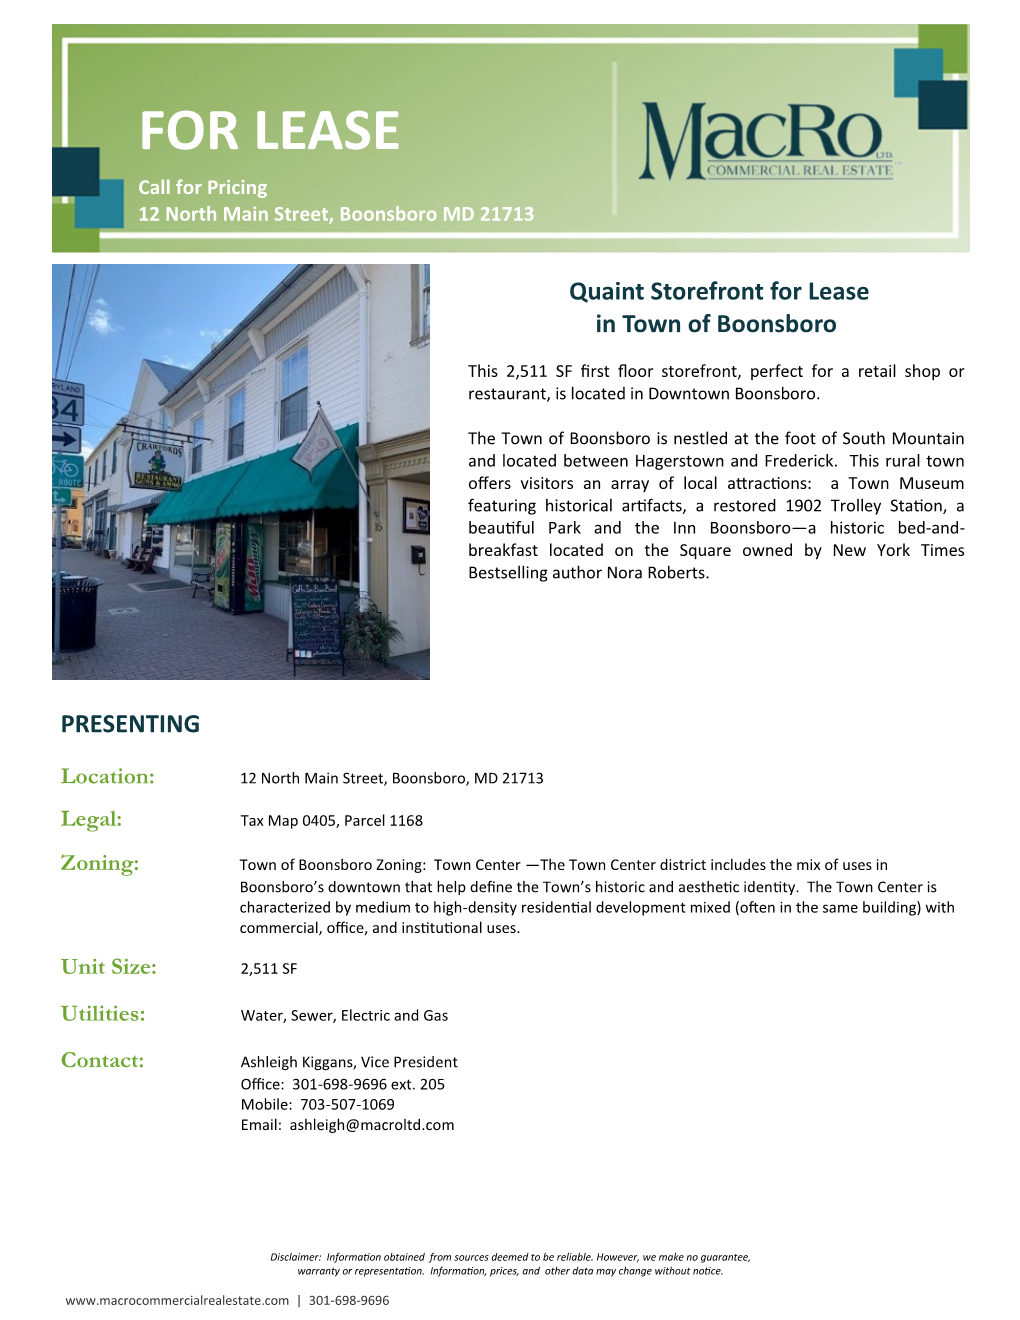 FOR LEASE Call for Pricing 12 North Main Street, Boonsboro MD 21713